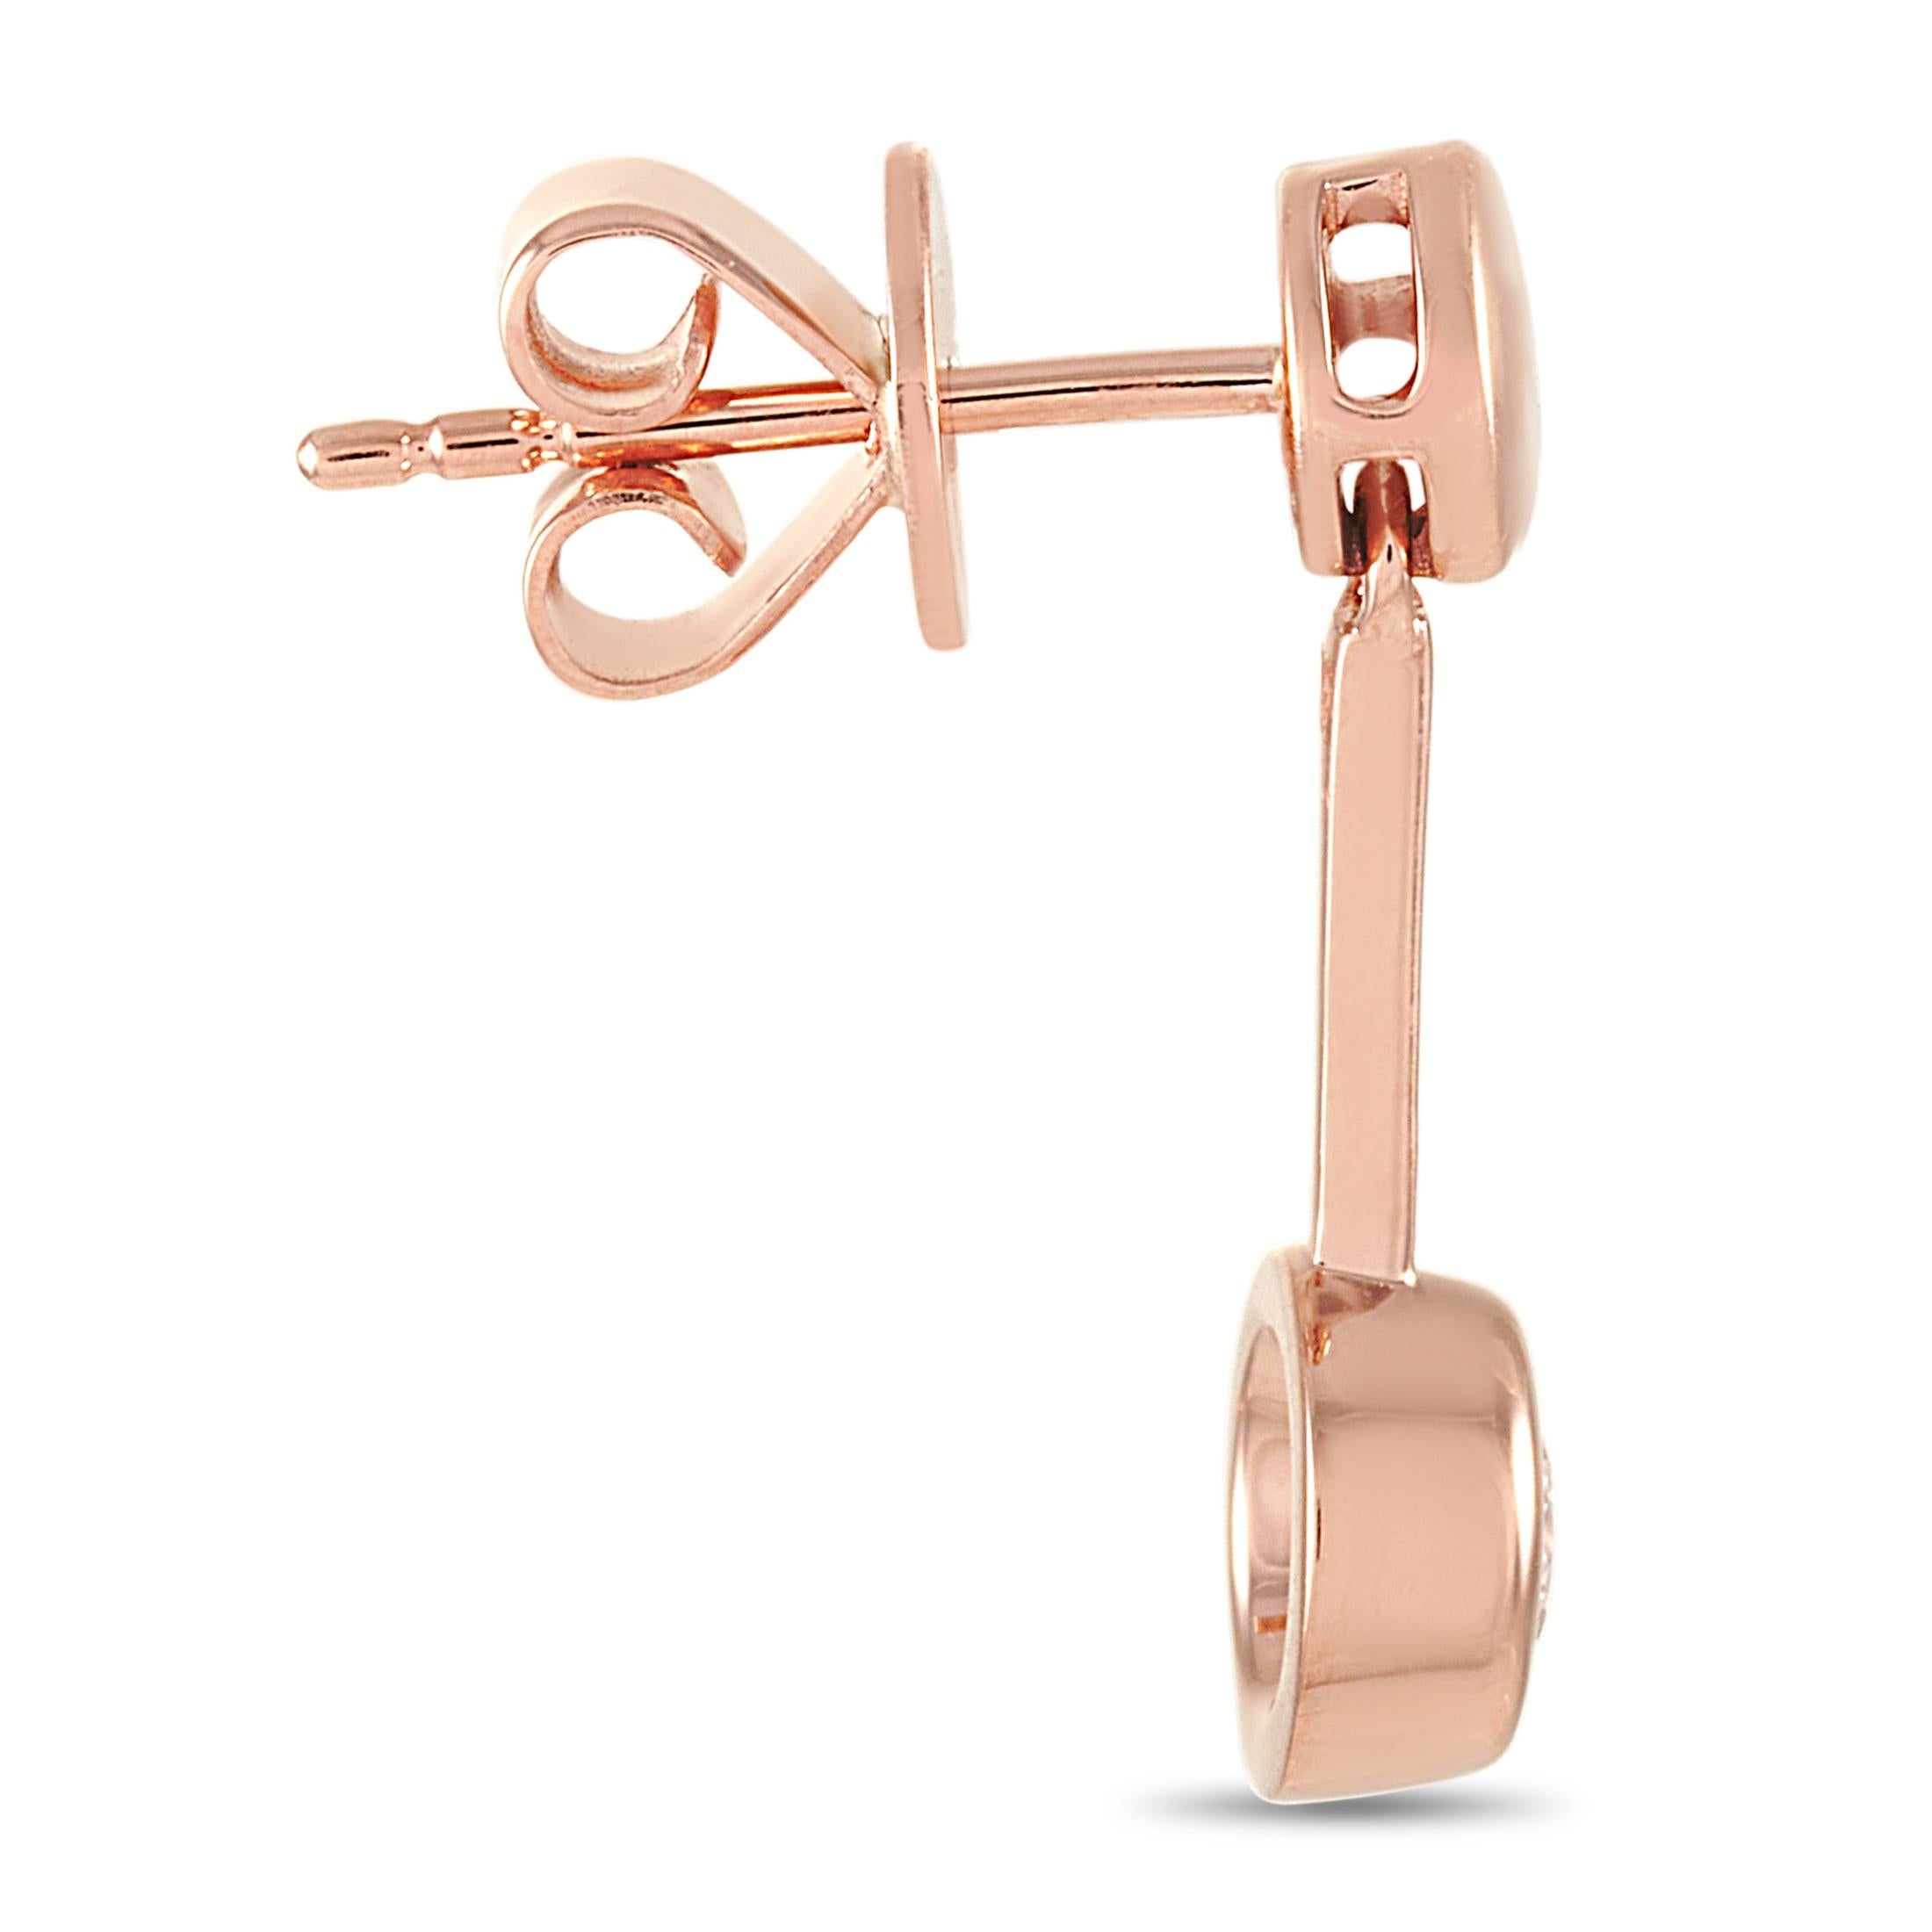 These LB Exclusive earrings are made of 14K rose gold and embellished with diamonds that total 0.58 carats. The earrings measure 0.63” in length and 0.19” in width and each of the two weighs 1.45 grams.
 
 The pair is offered in brand new condition